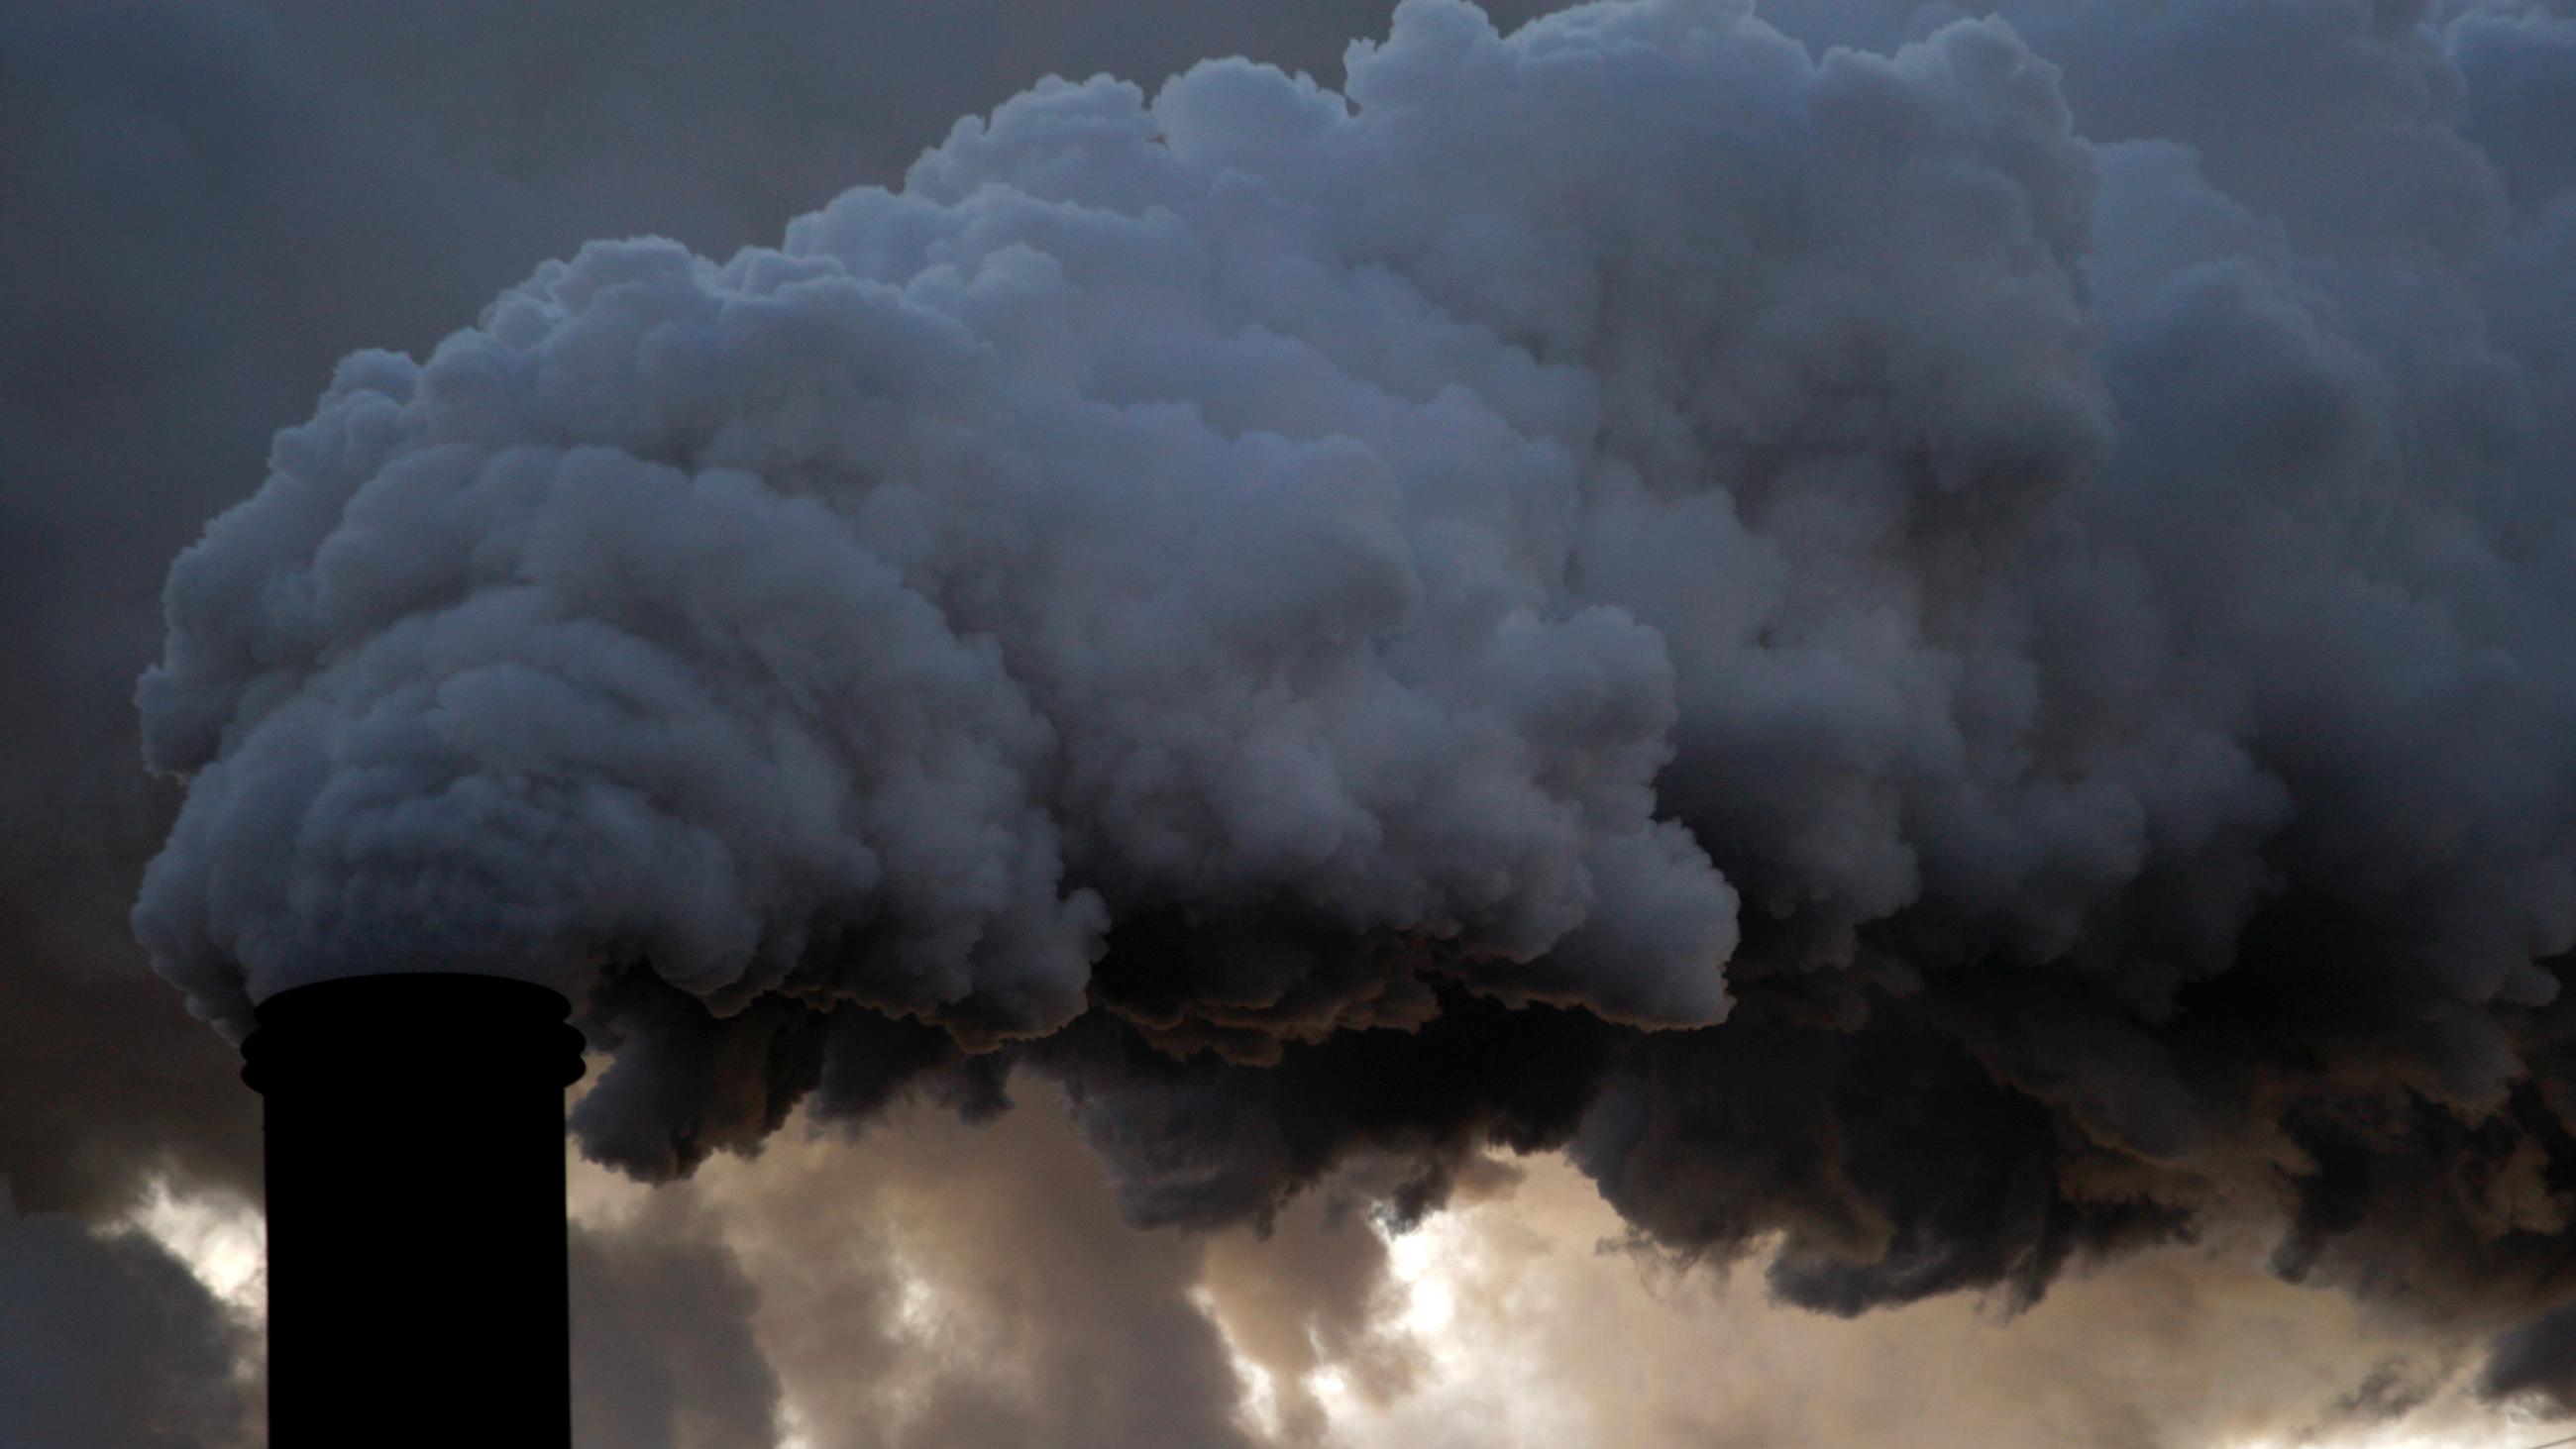 The image shows a large smokestack belching out black billows and blocking the cloudy sky. 